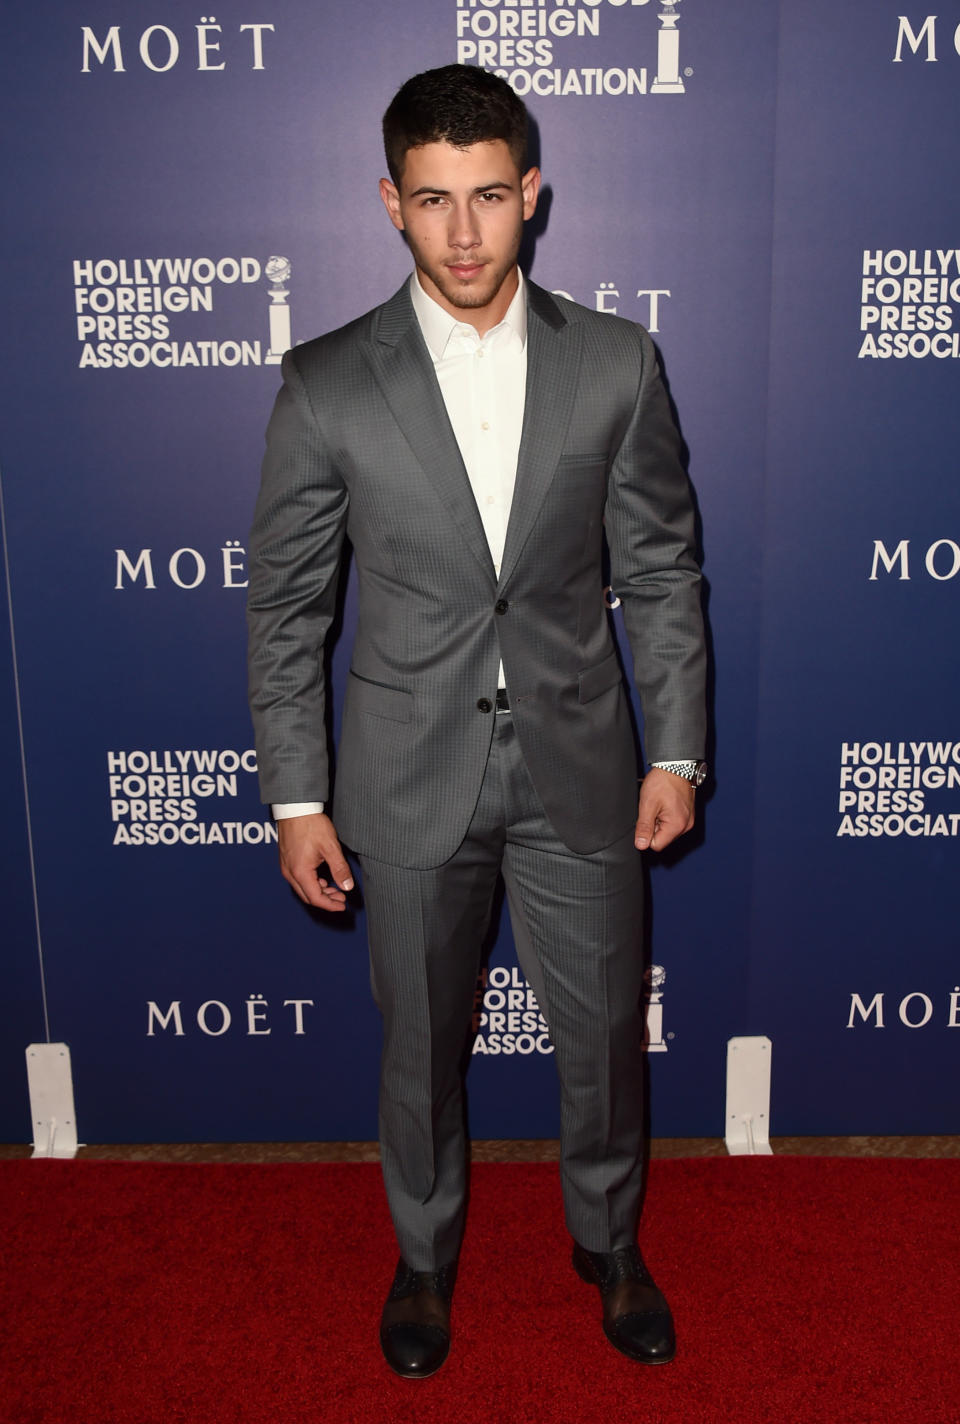 Nick Jonas arrives at the Hollywood Foreign Press Association's Grants Banquet at the Beverly Hilton hotel on Thursday, Aug. 14, 2014, in Beverly Hills, Calif. (Photo by Jordan Strauss/Invision/AP)